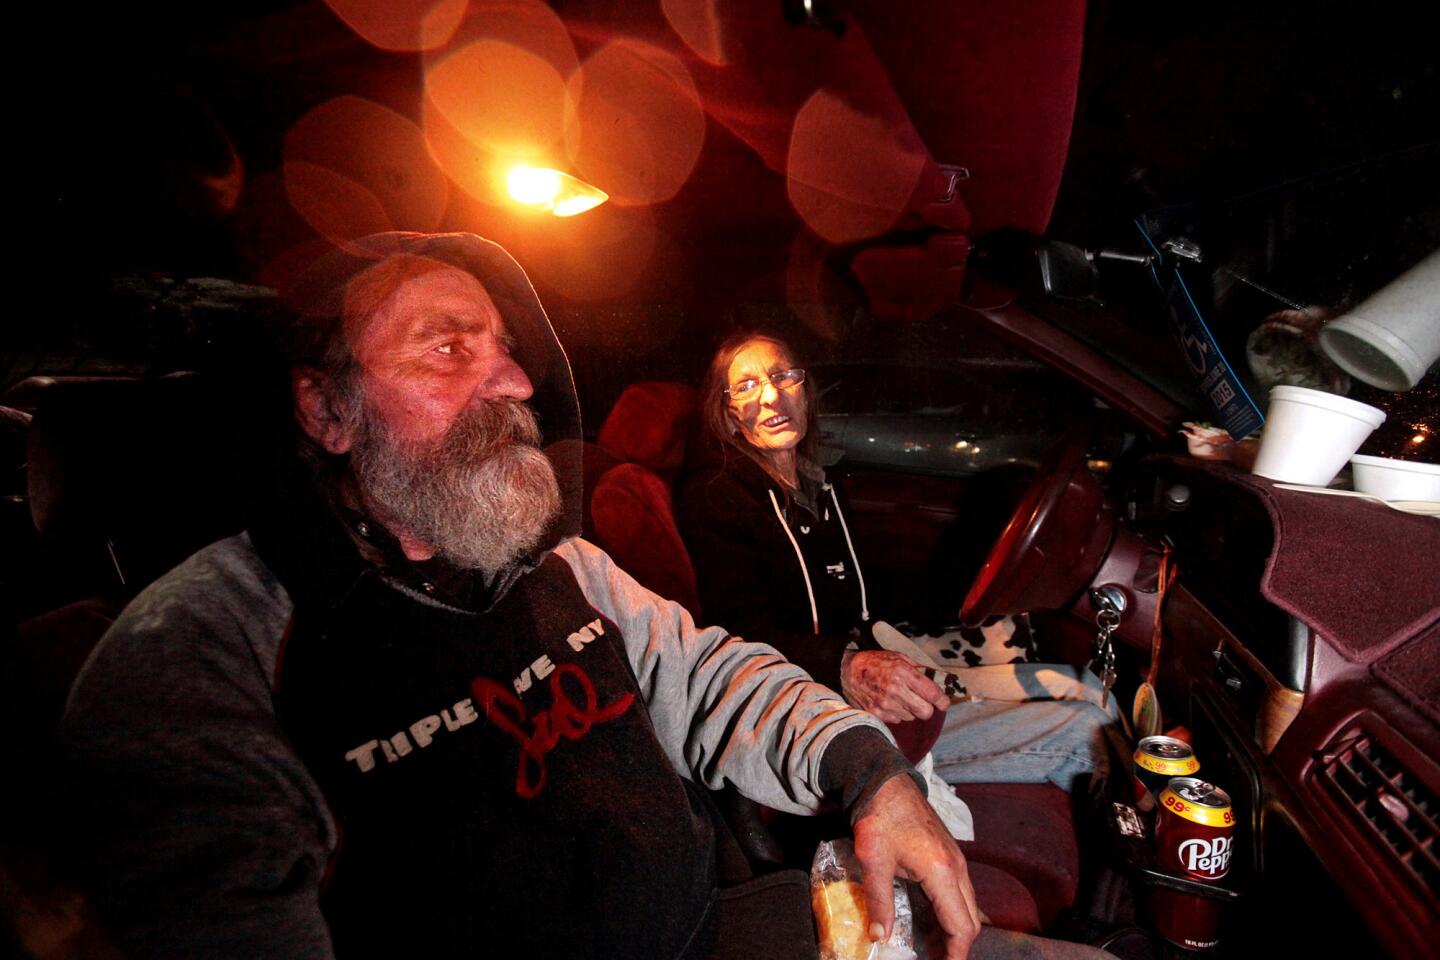 Brother and sister Addison Dorsten, 59, left, and Christine Chapman, 65, eat dinner in their car at the Sonoma County "Safe Parking" lot at the fairgrounds in Santa Rosa.